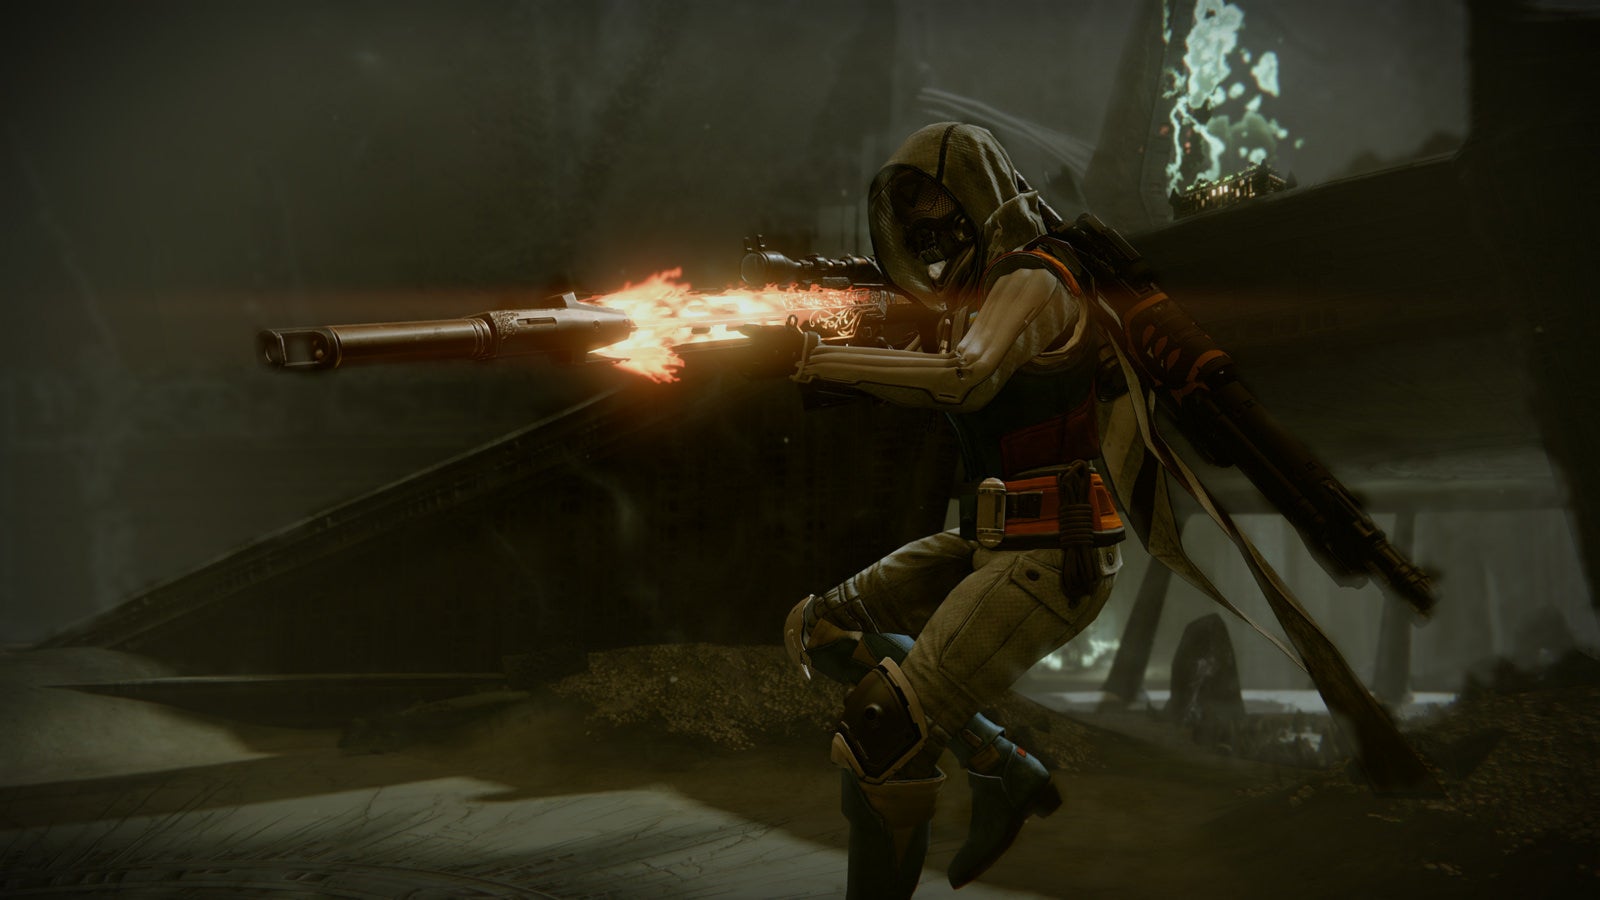 Image for Destiny hotfix deployed to reduce Beaver errors related to latest patch